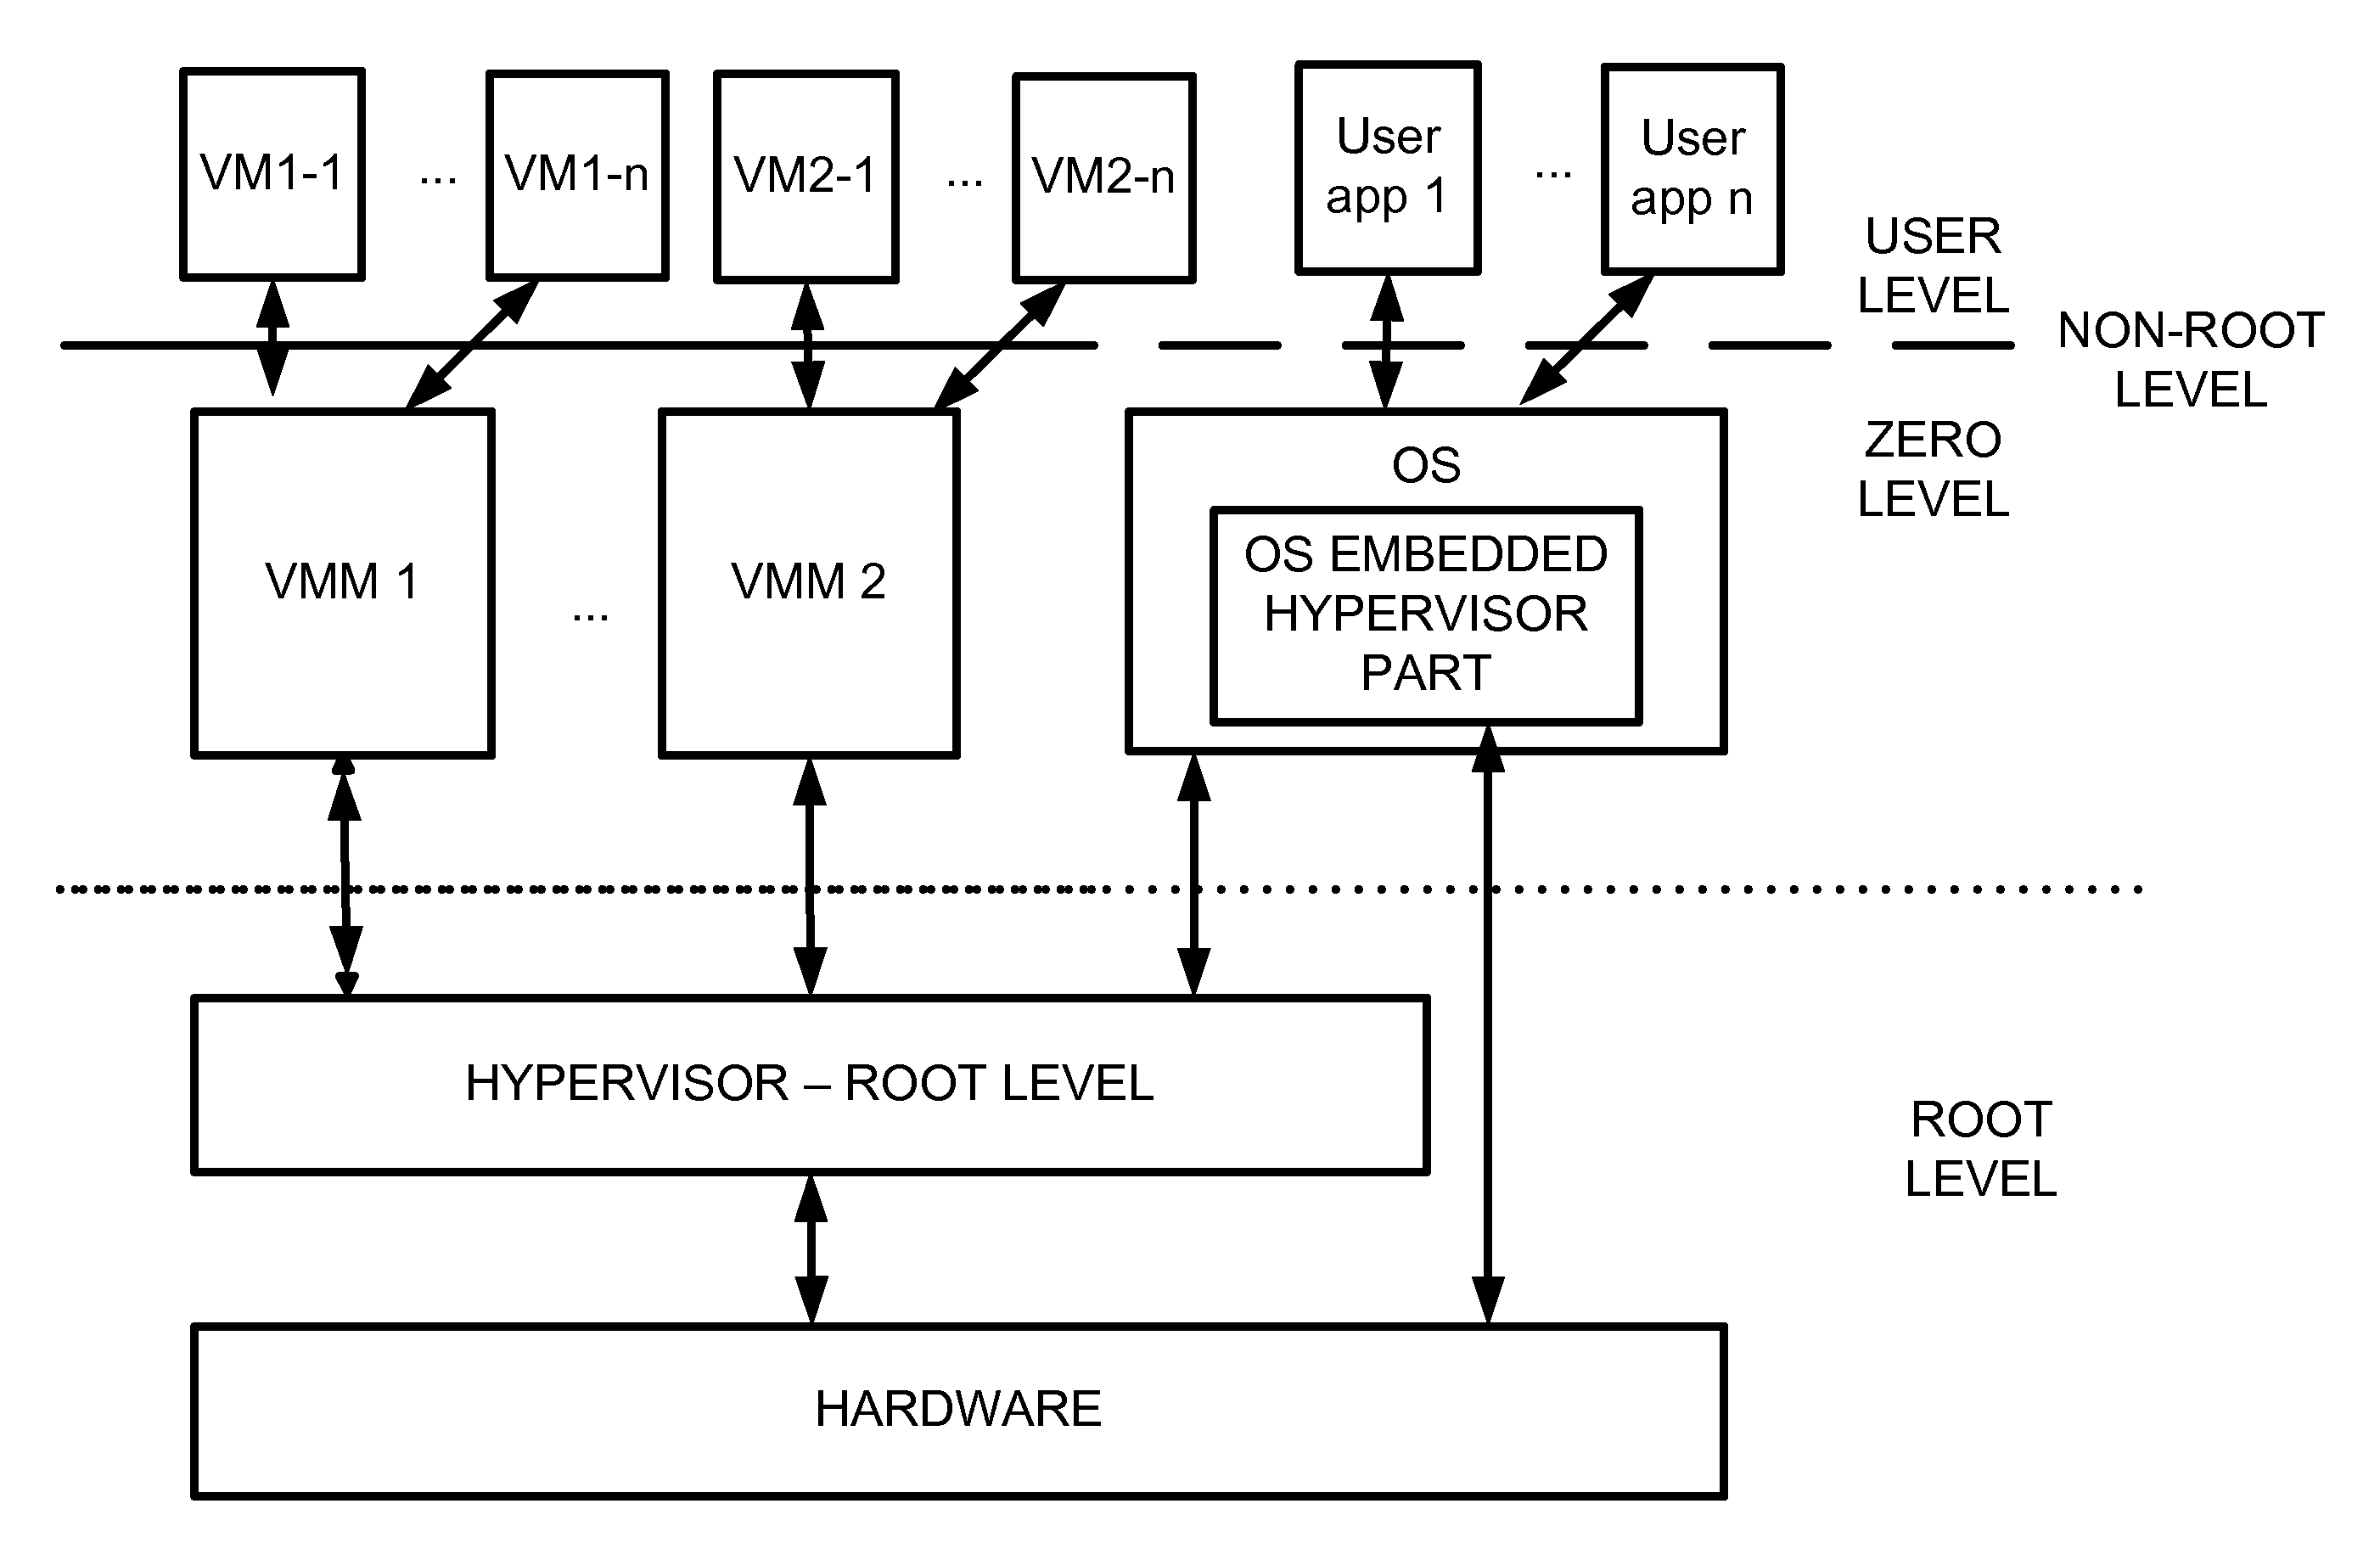 Virtualization system with hypervisor embedded in bios or using extensible firmware interface